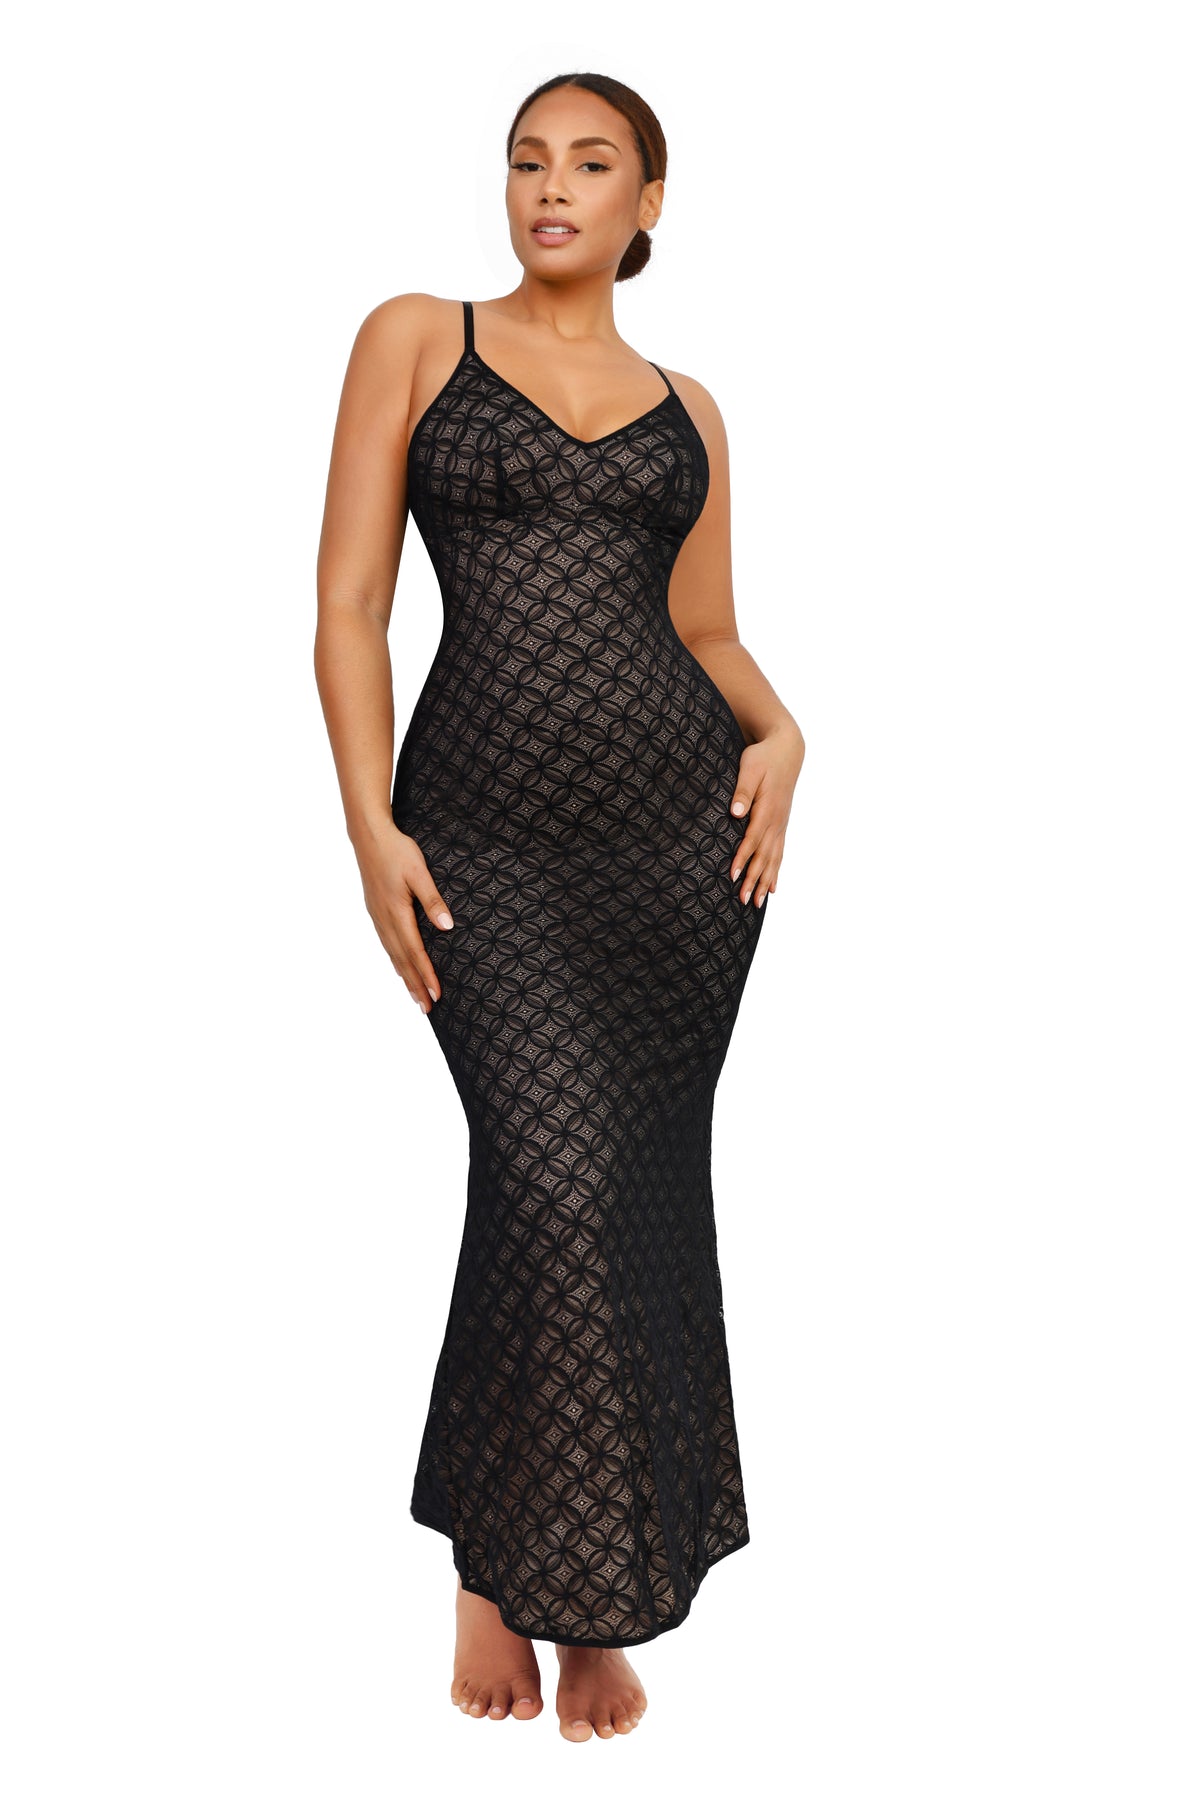 Lover-Beauty Lace Glamour Sleeveless Slip Elegant Bodycon Long Formal Party Evening Dress